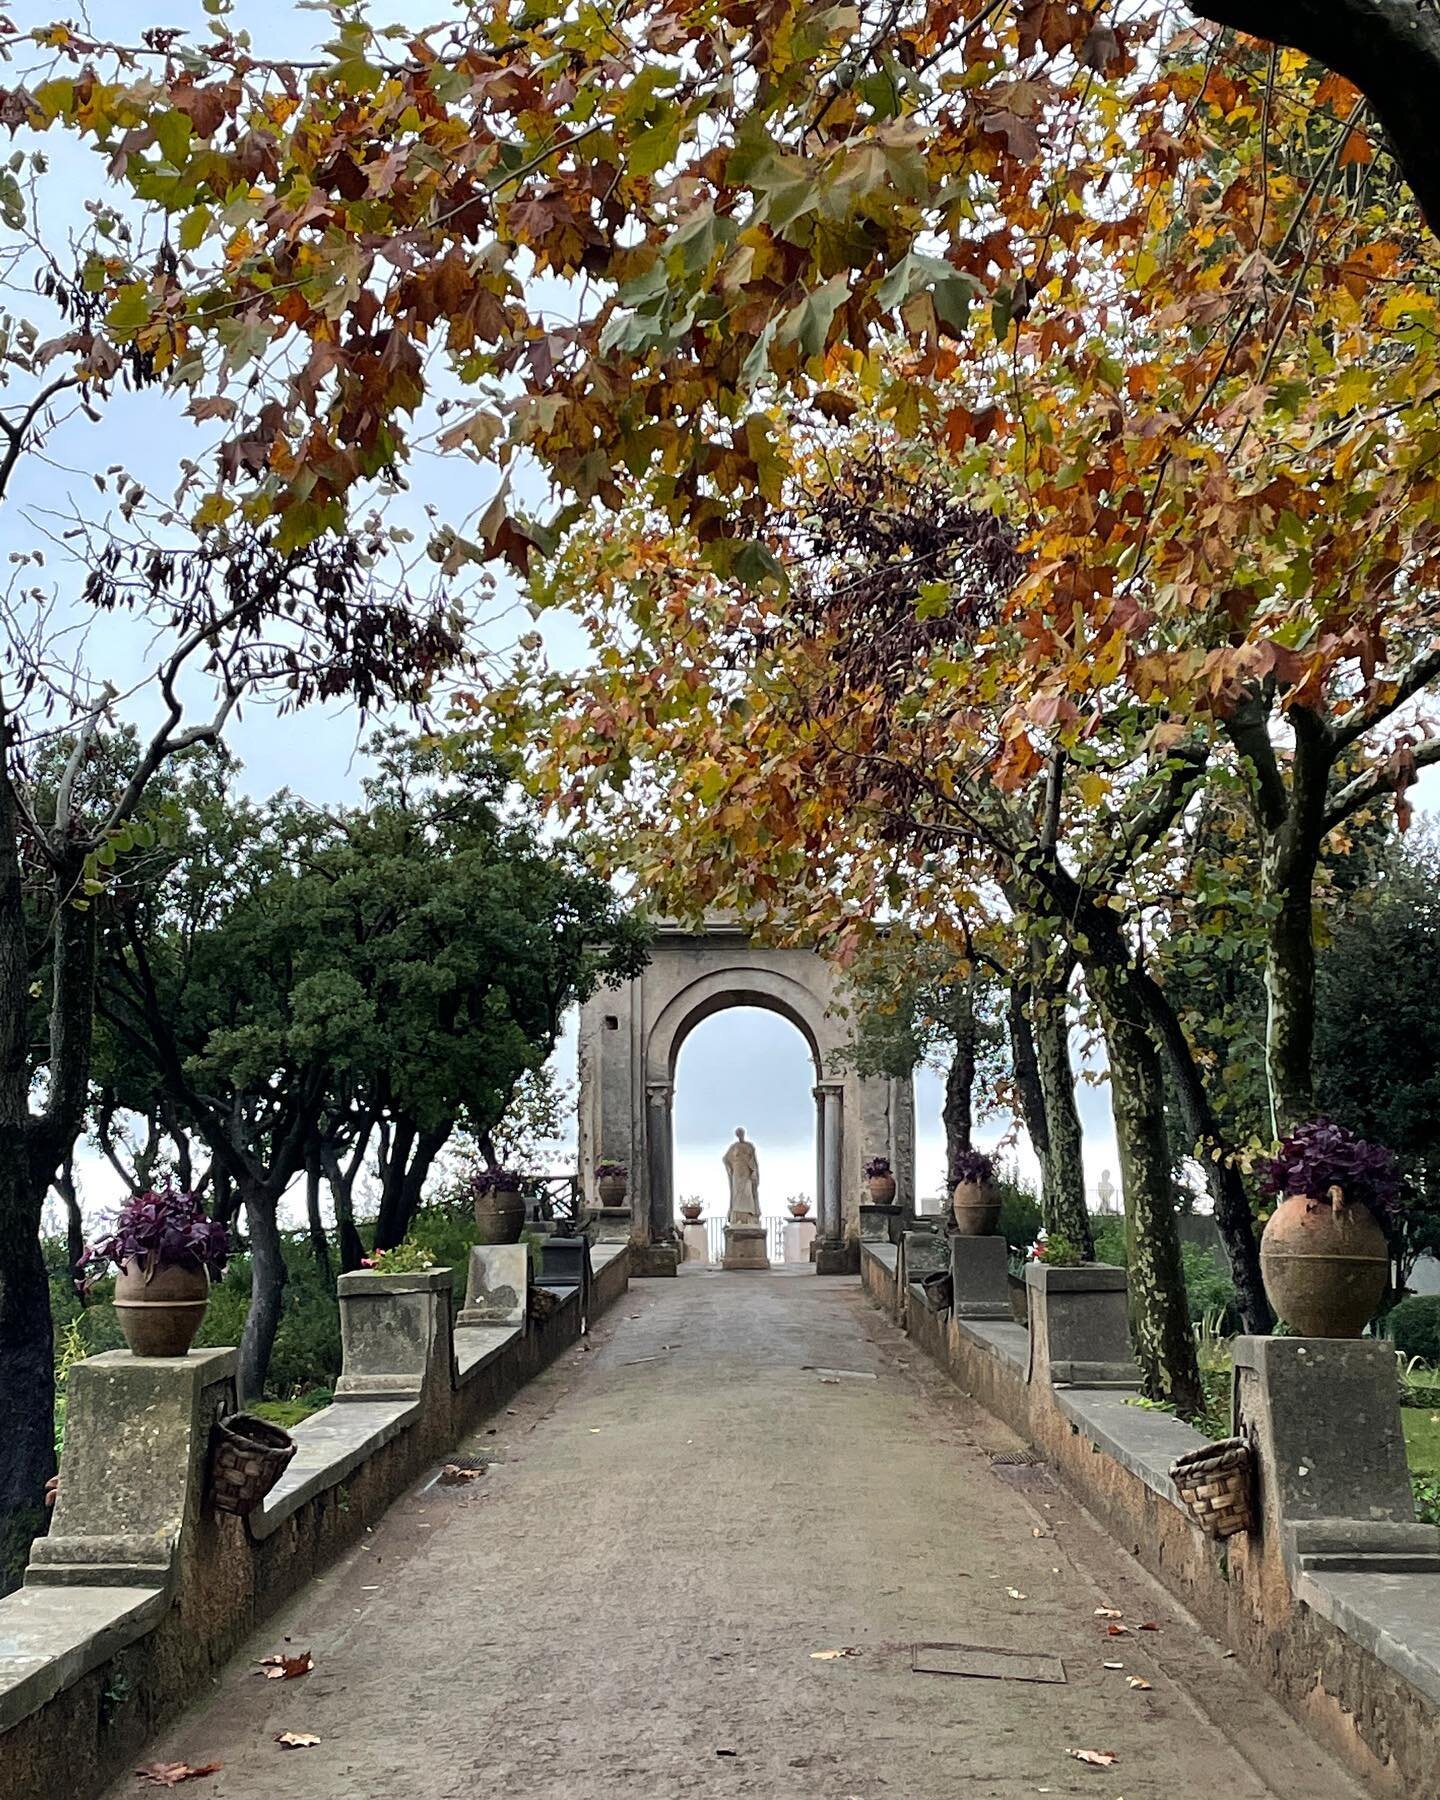 I like seeing the gardens at Villa Cimbrone, southern Italy. Nice to see such a normally sun baked space rain drenched and moody, with the flowers going over and the statues menacing. The villa has been passed down through various Italian aristocrats